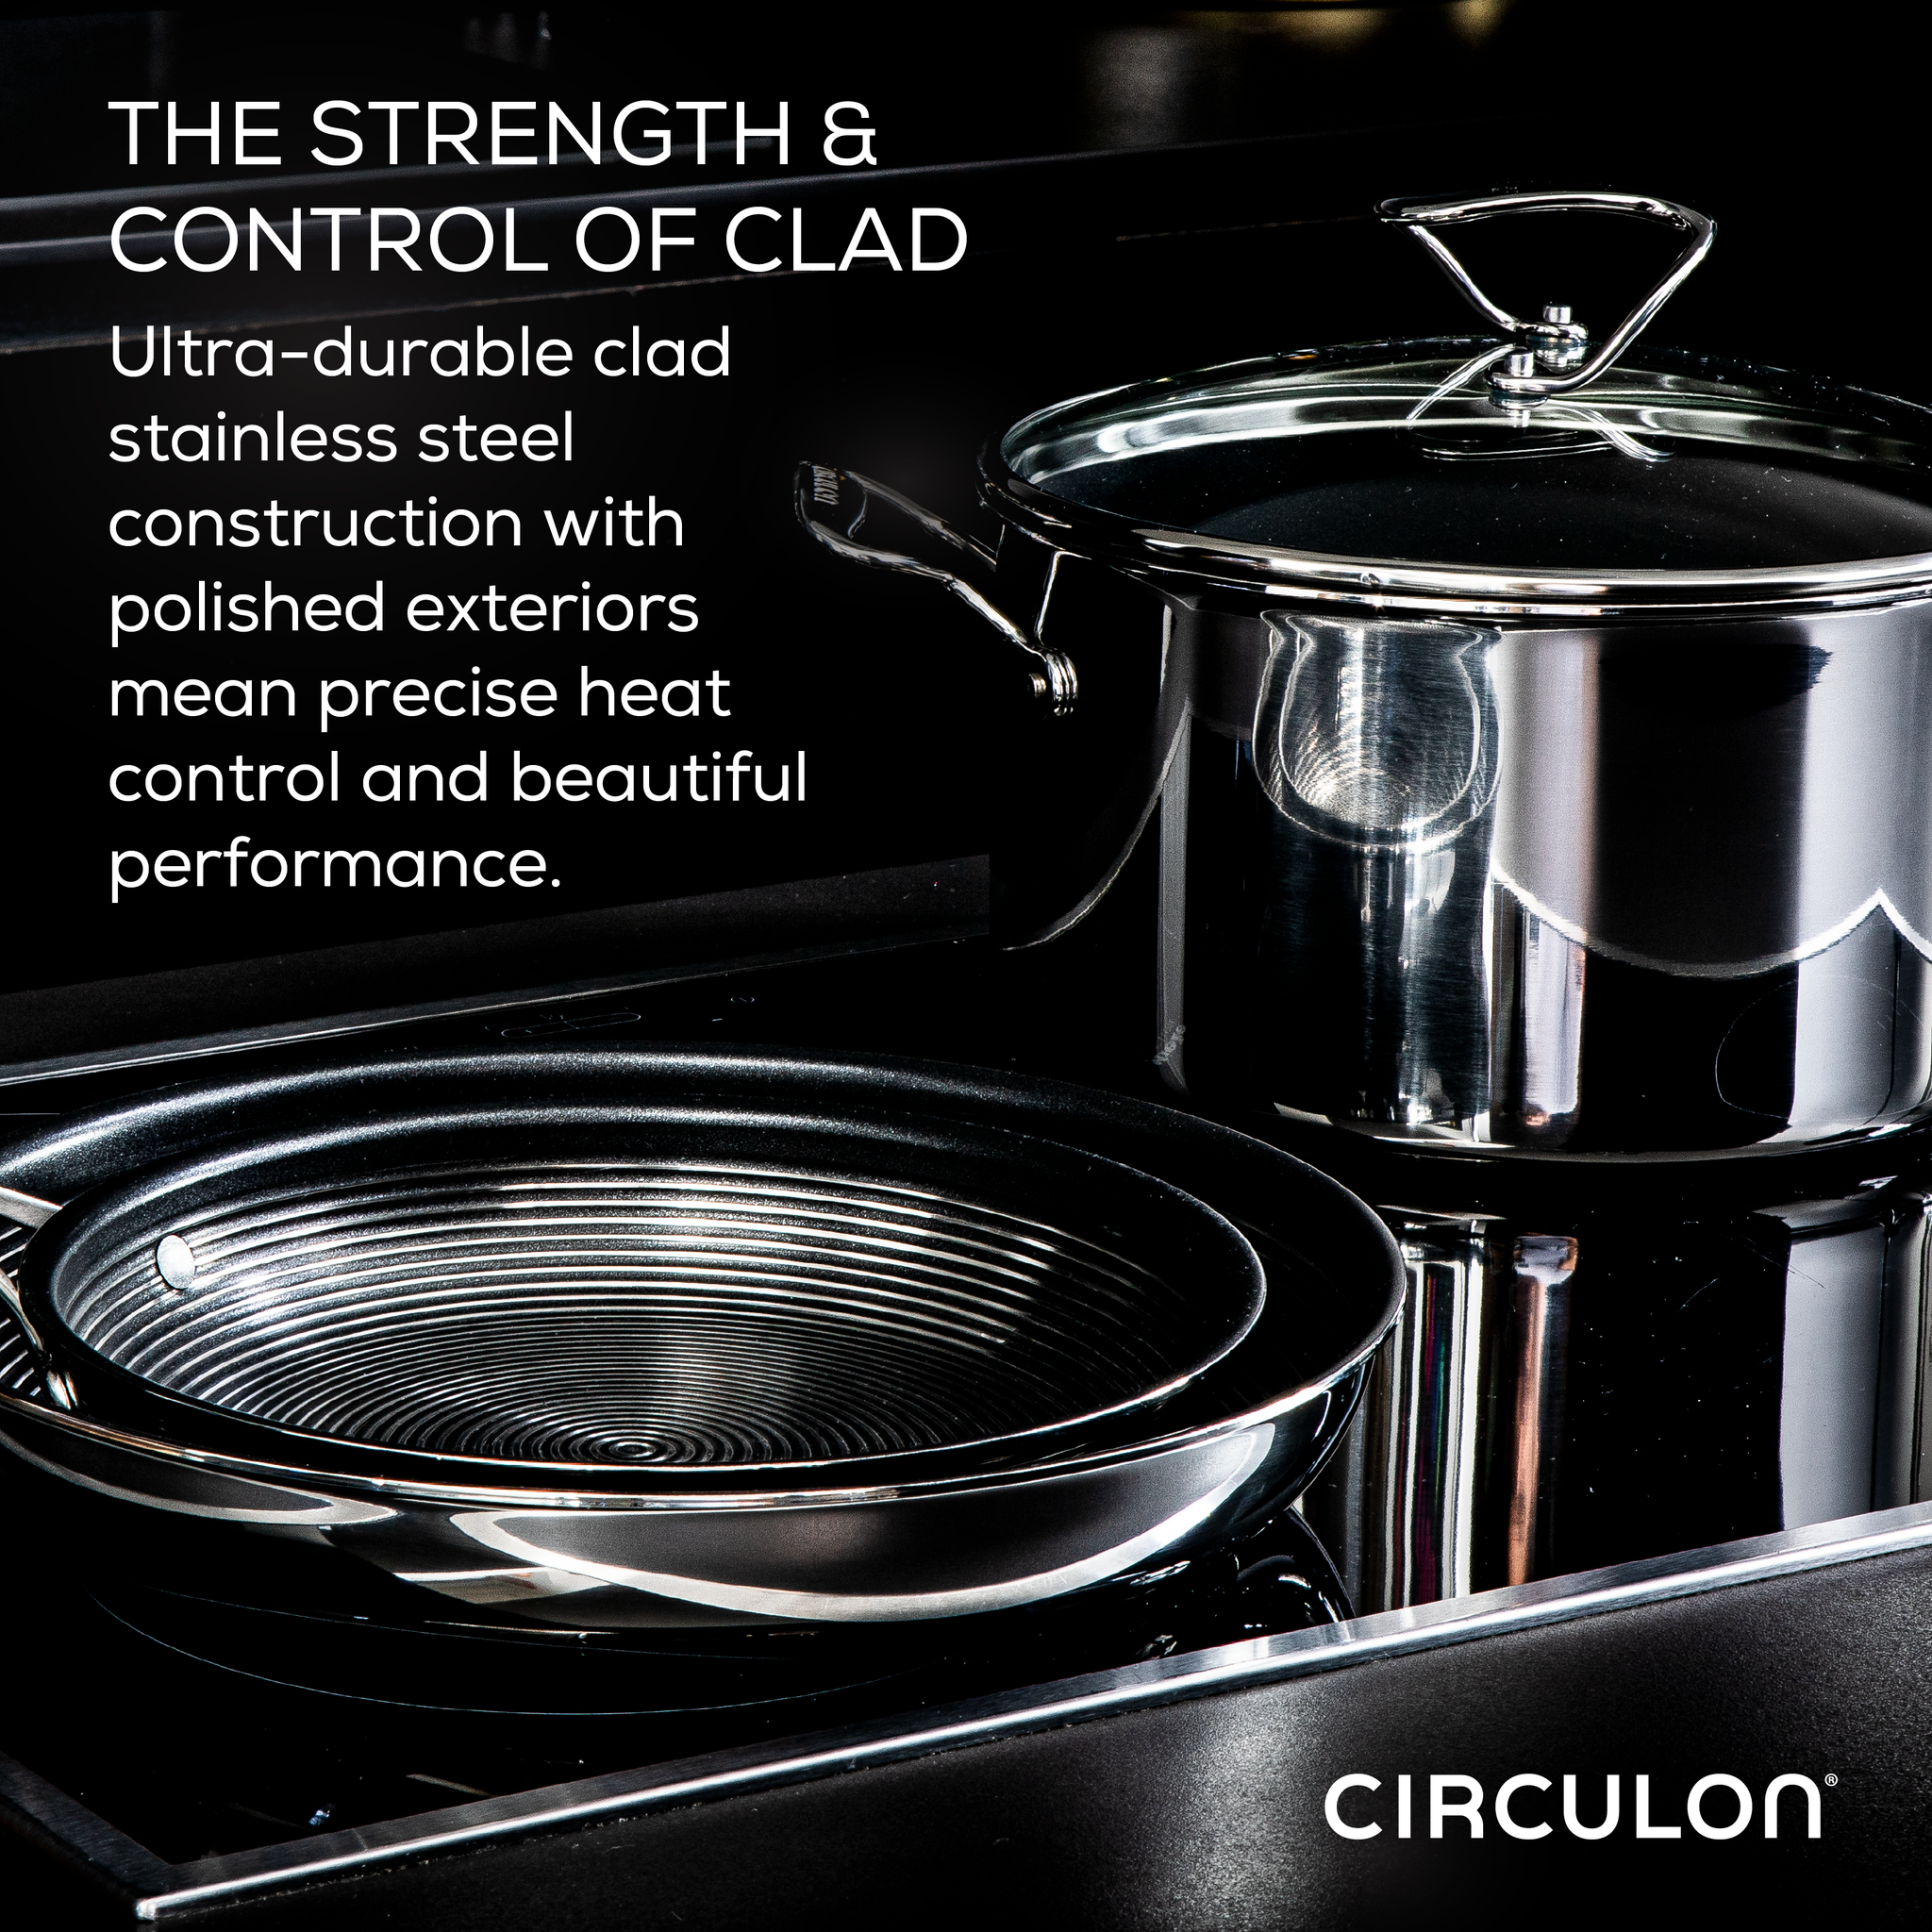  Pots and Pans Set 5-Piece, Ultra-Clad Pro Stainless